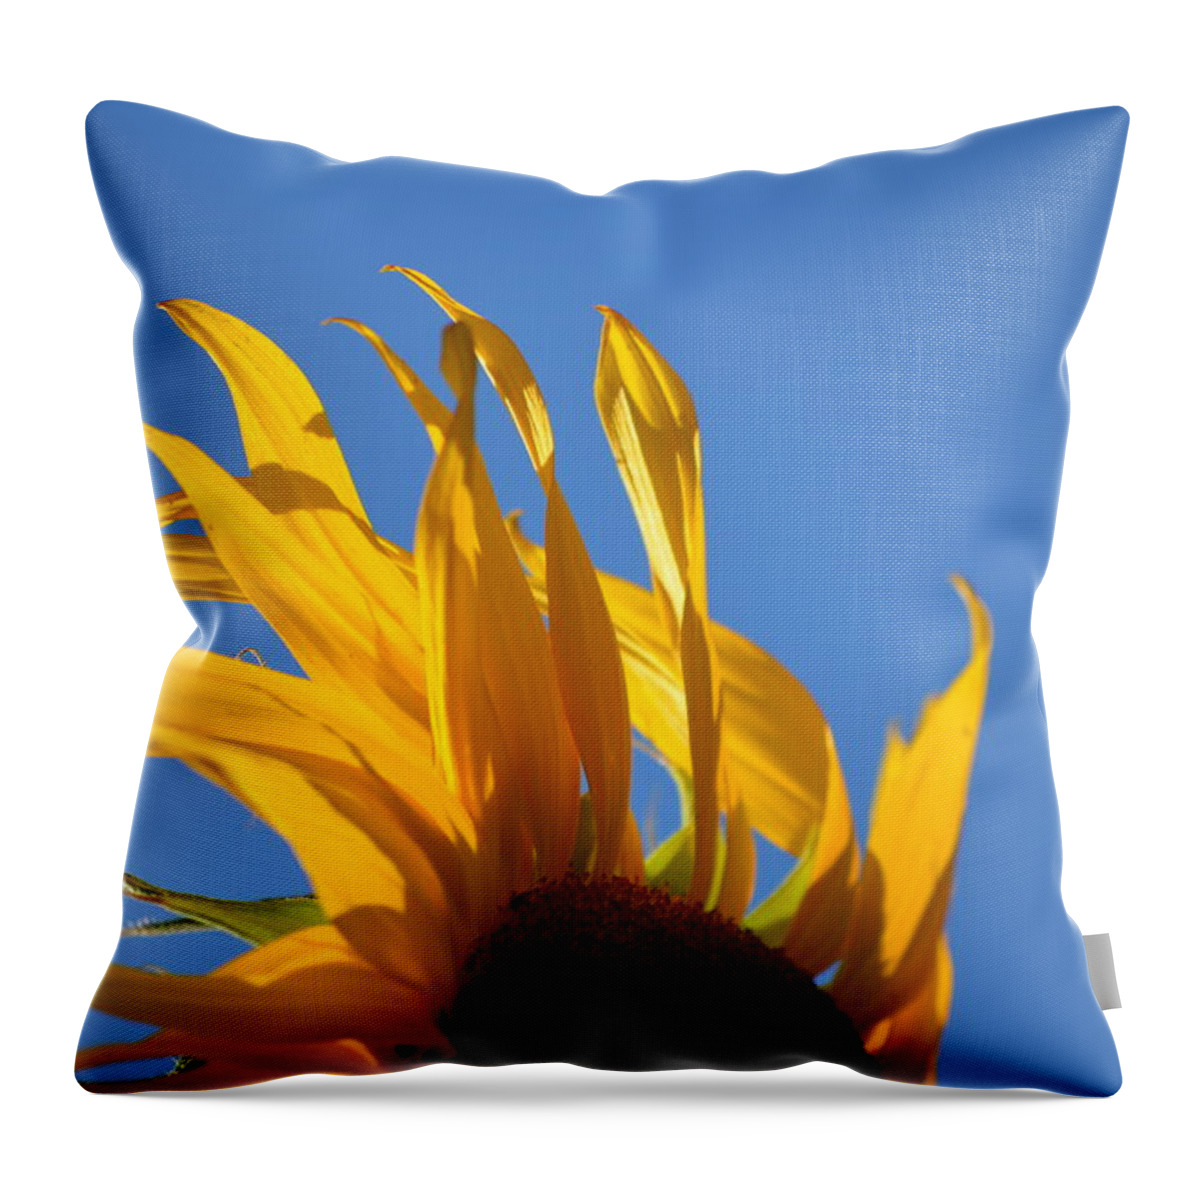 Sunflowers Throw Pillow featuring the photograph Blow Back by Gregory Merlin Brown